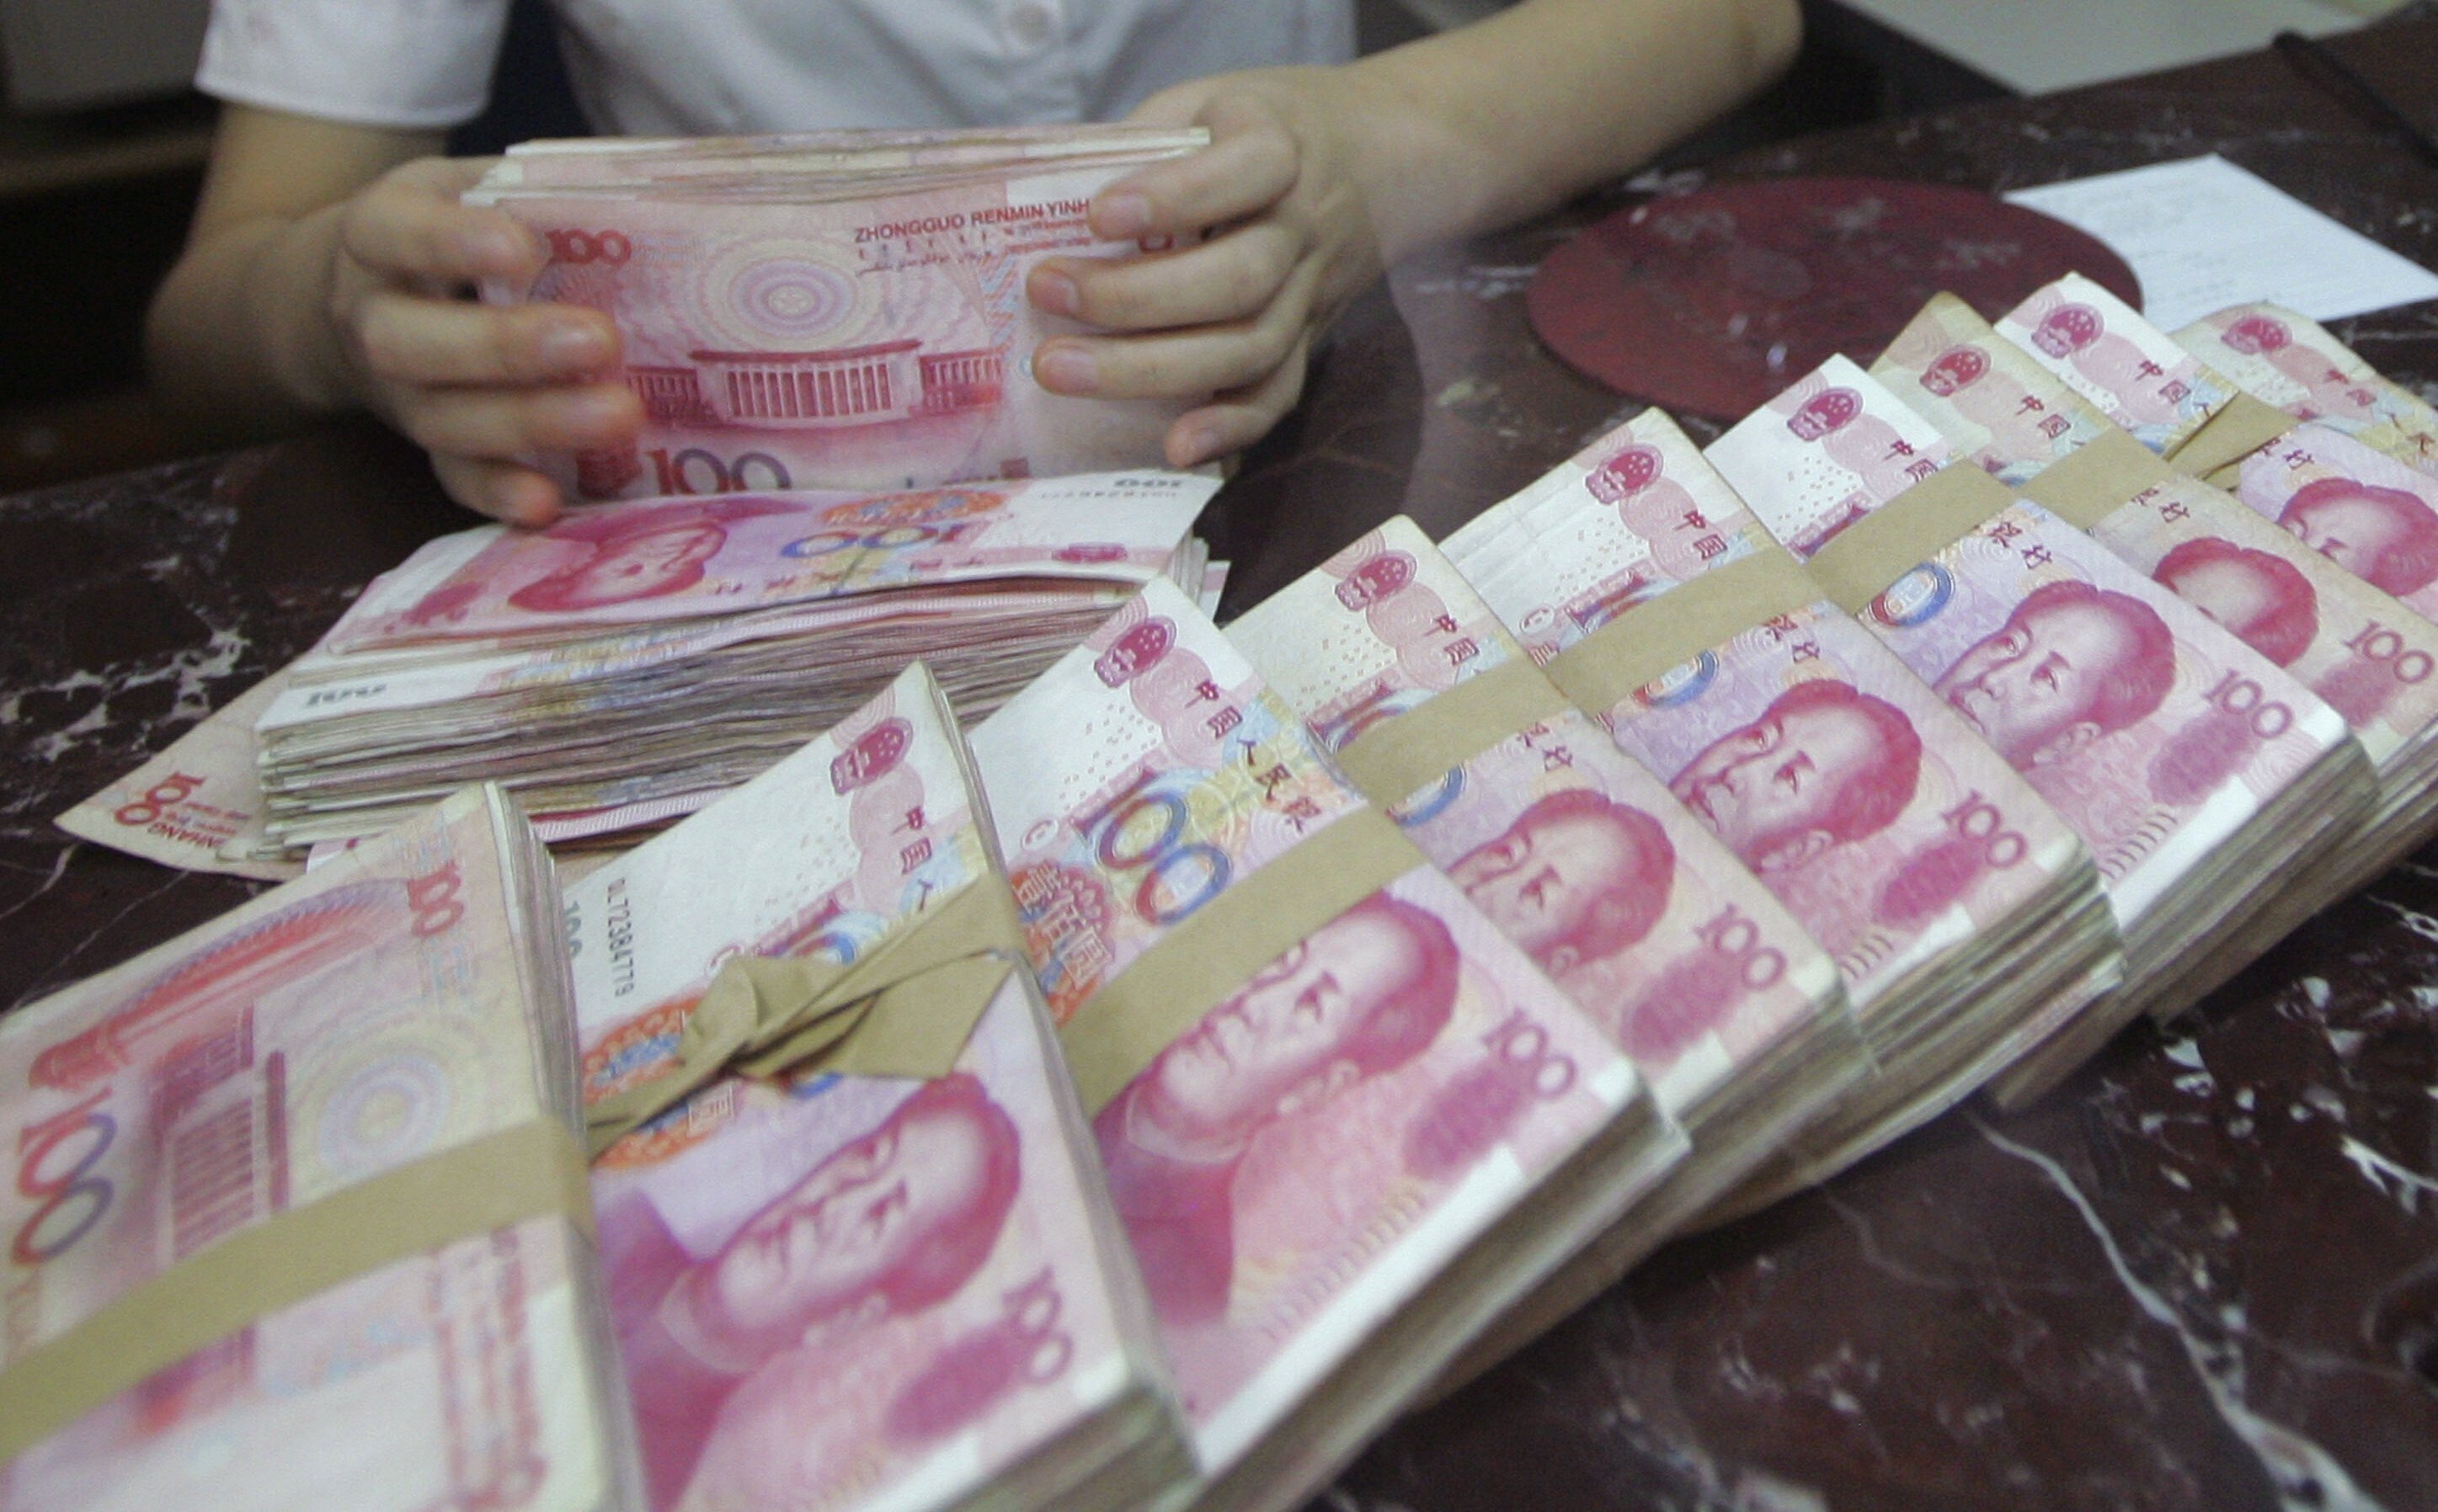 An employee counts yuan at a bank in Shenyang, Liaoning province, where the government is merging 12 small banks into one “first-class” bank. Photo: Reuters